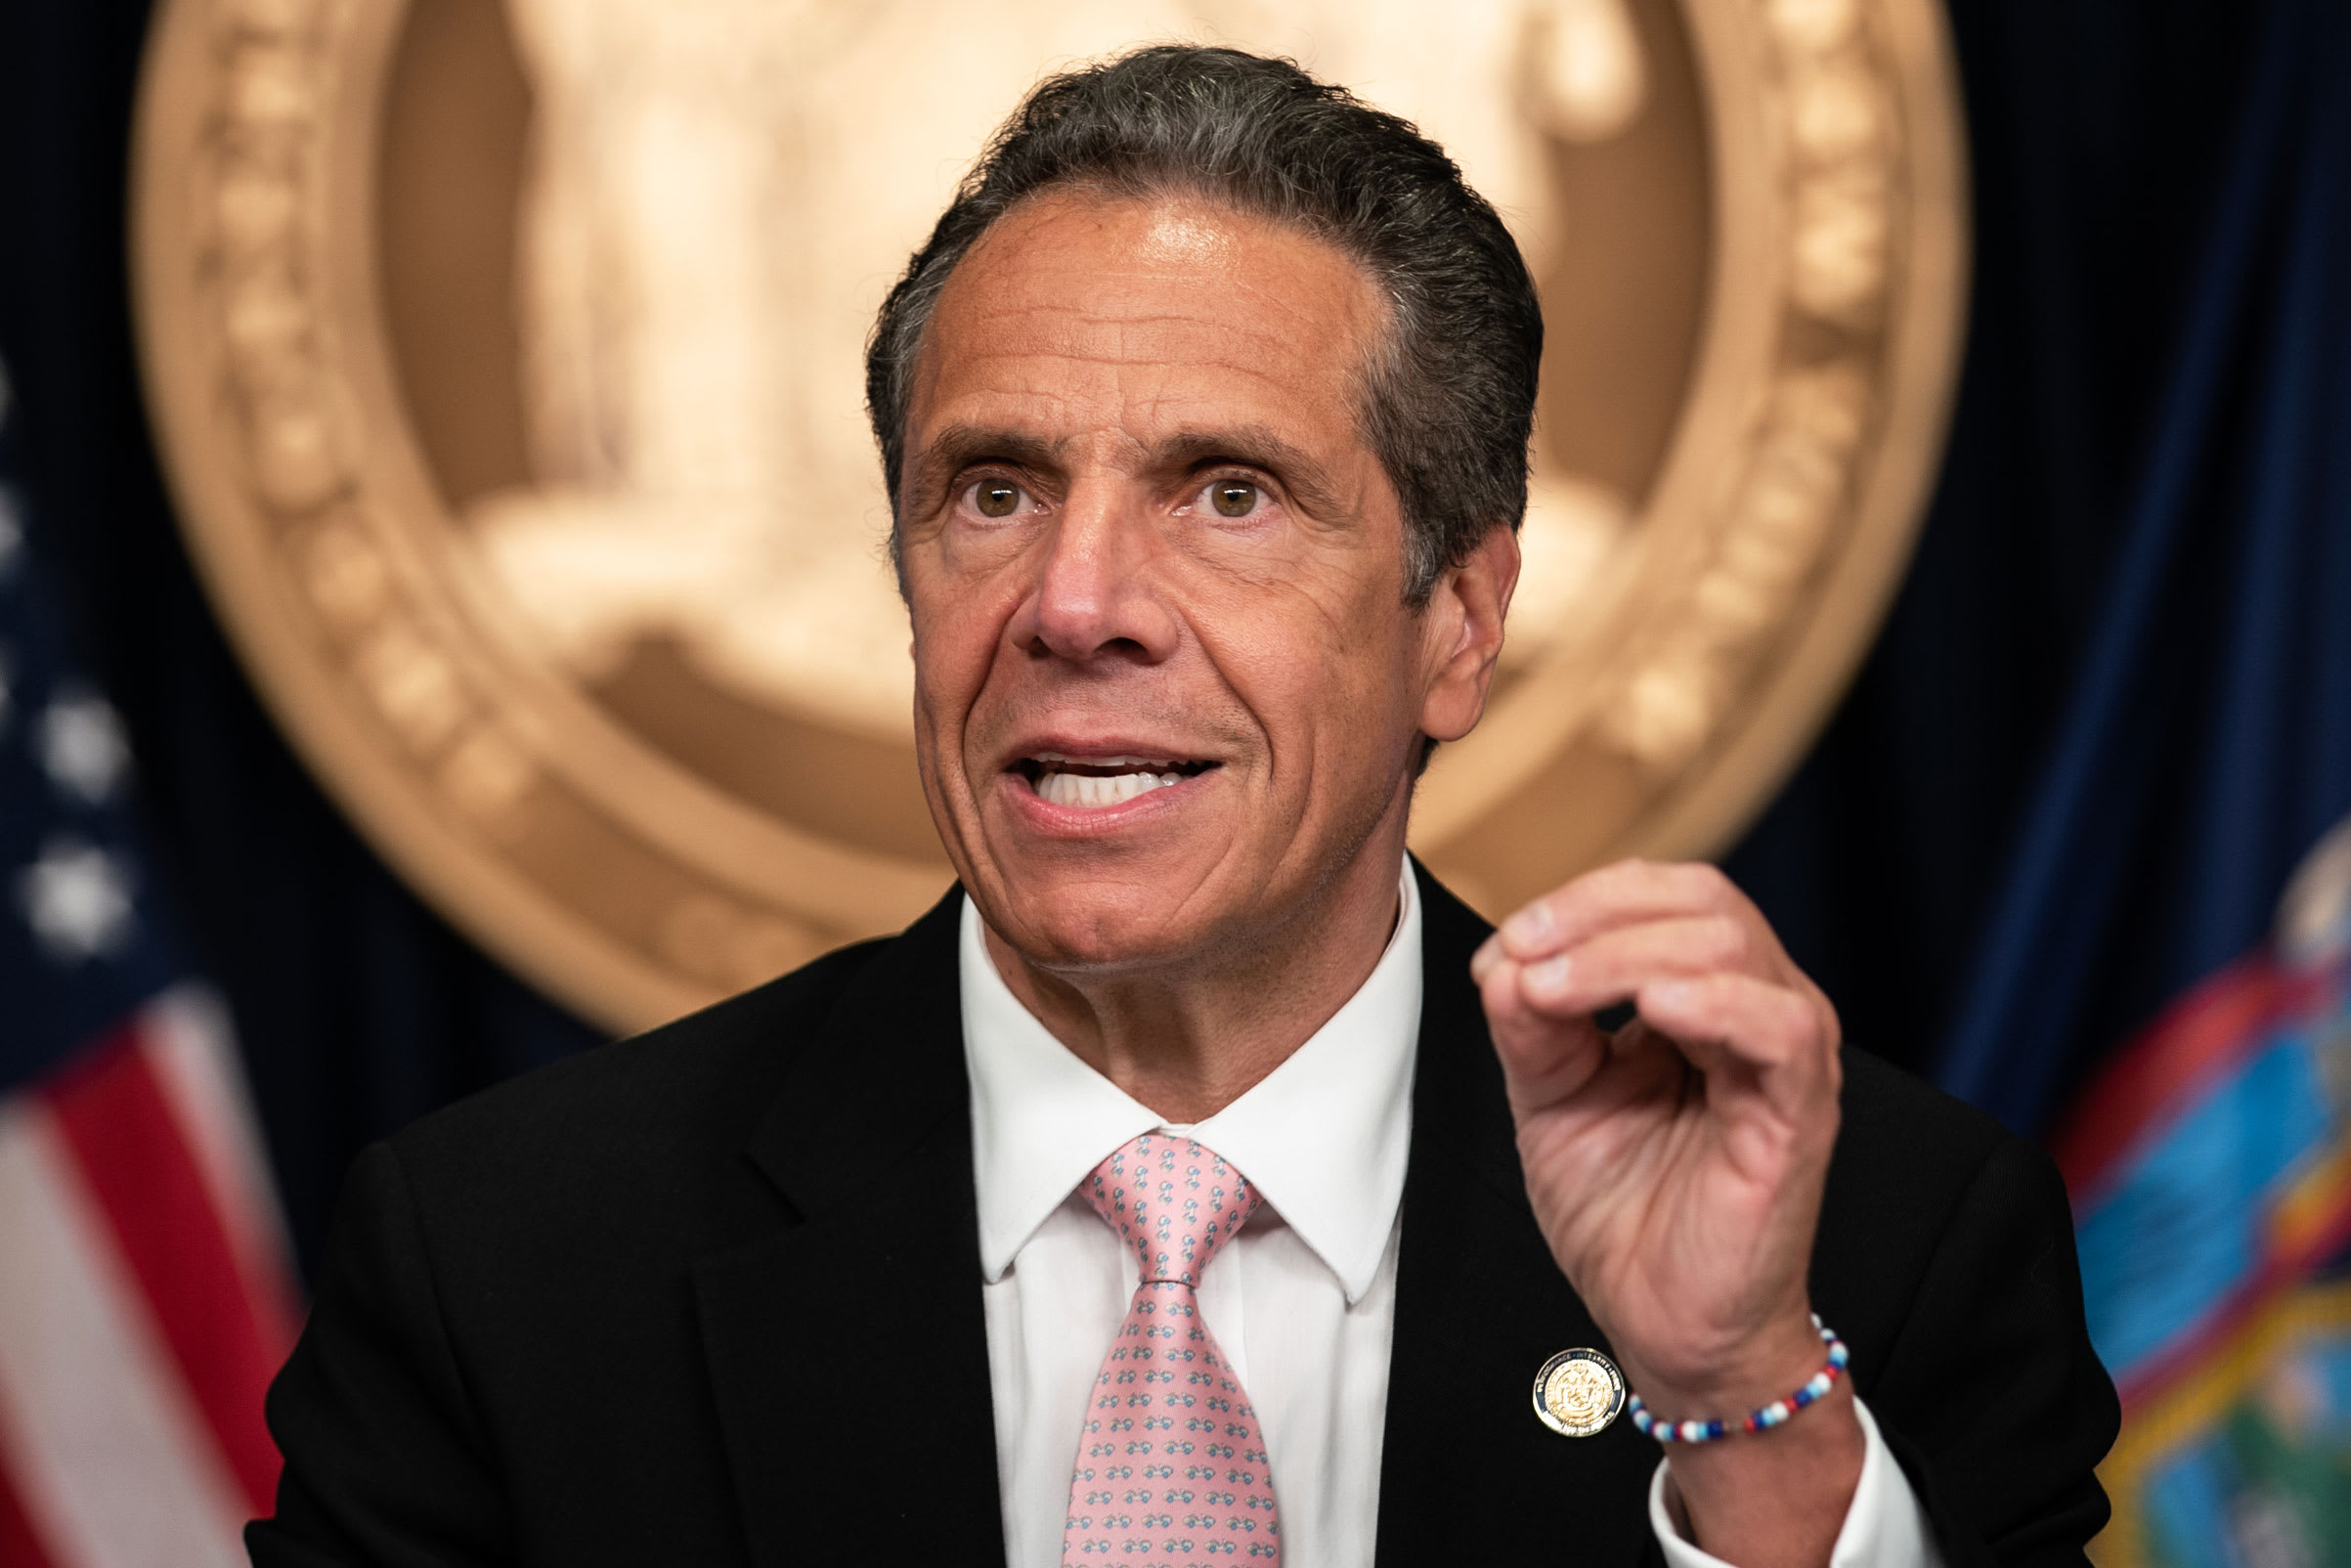 New York Gov. Cuomo warns NYC eating places could have to shut once more within the fall